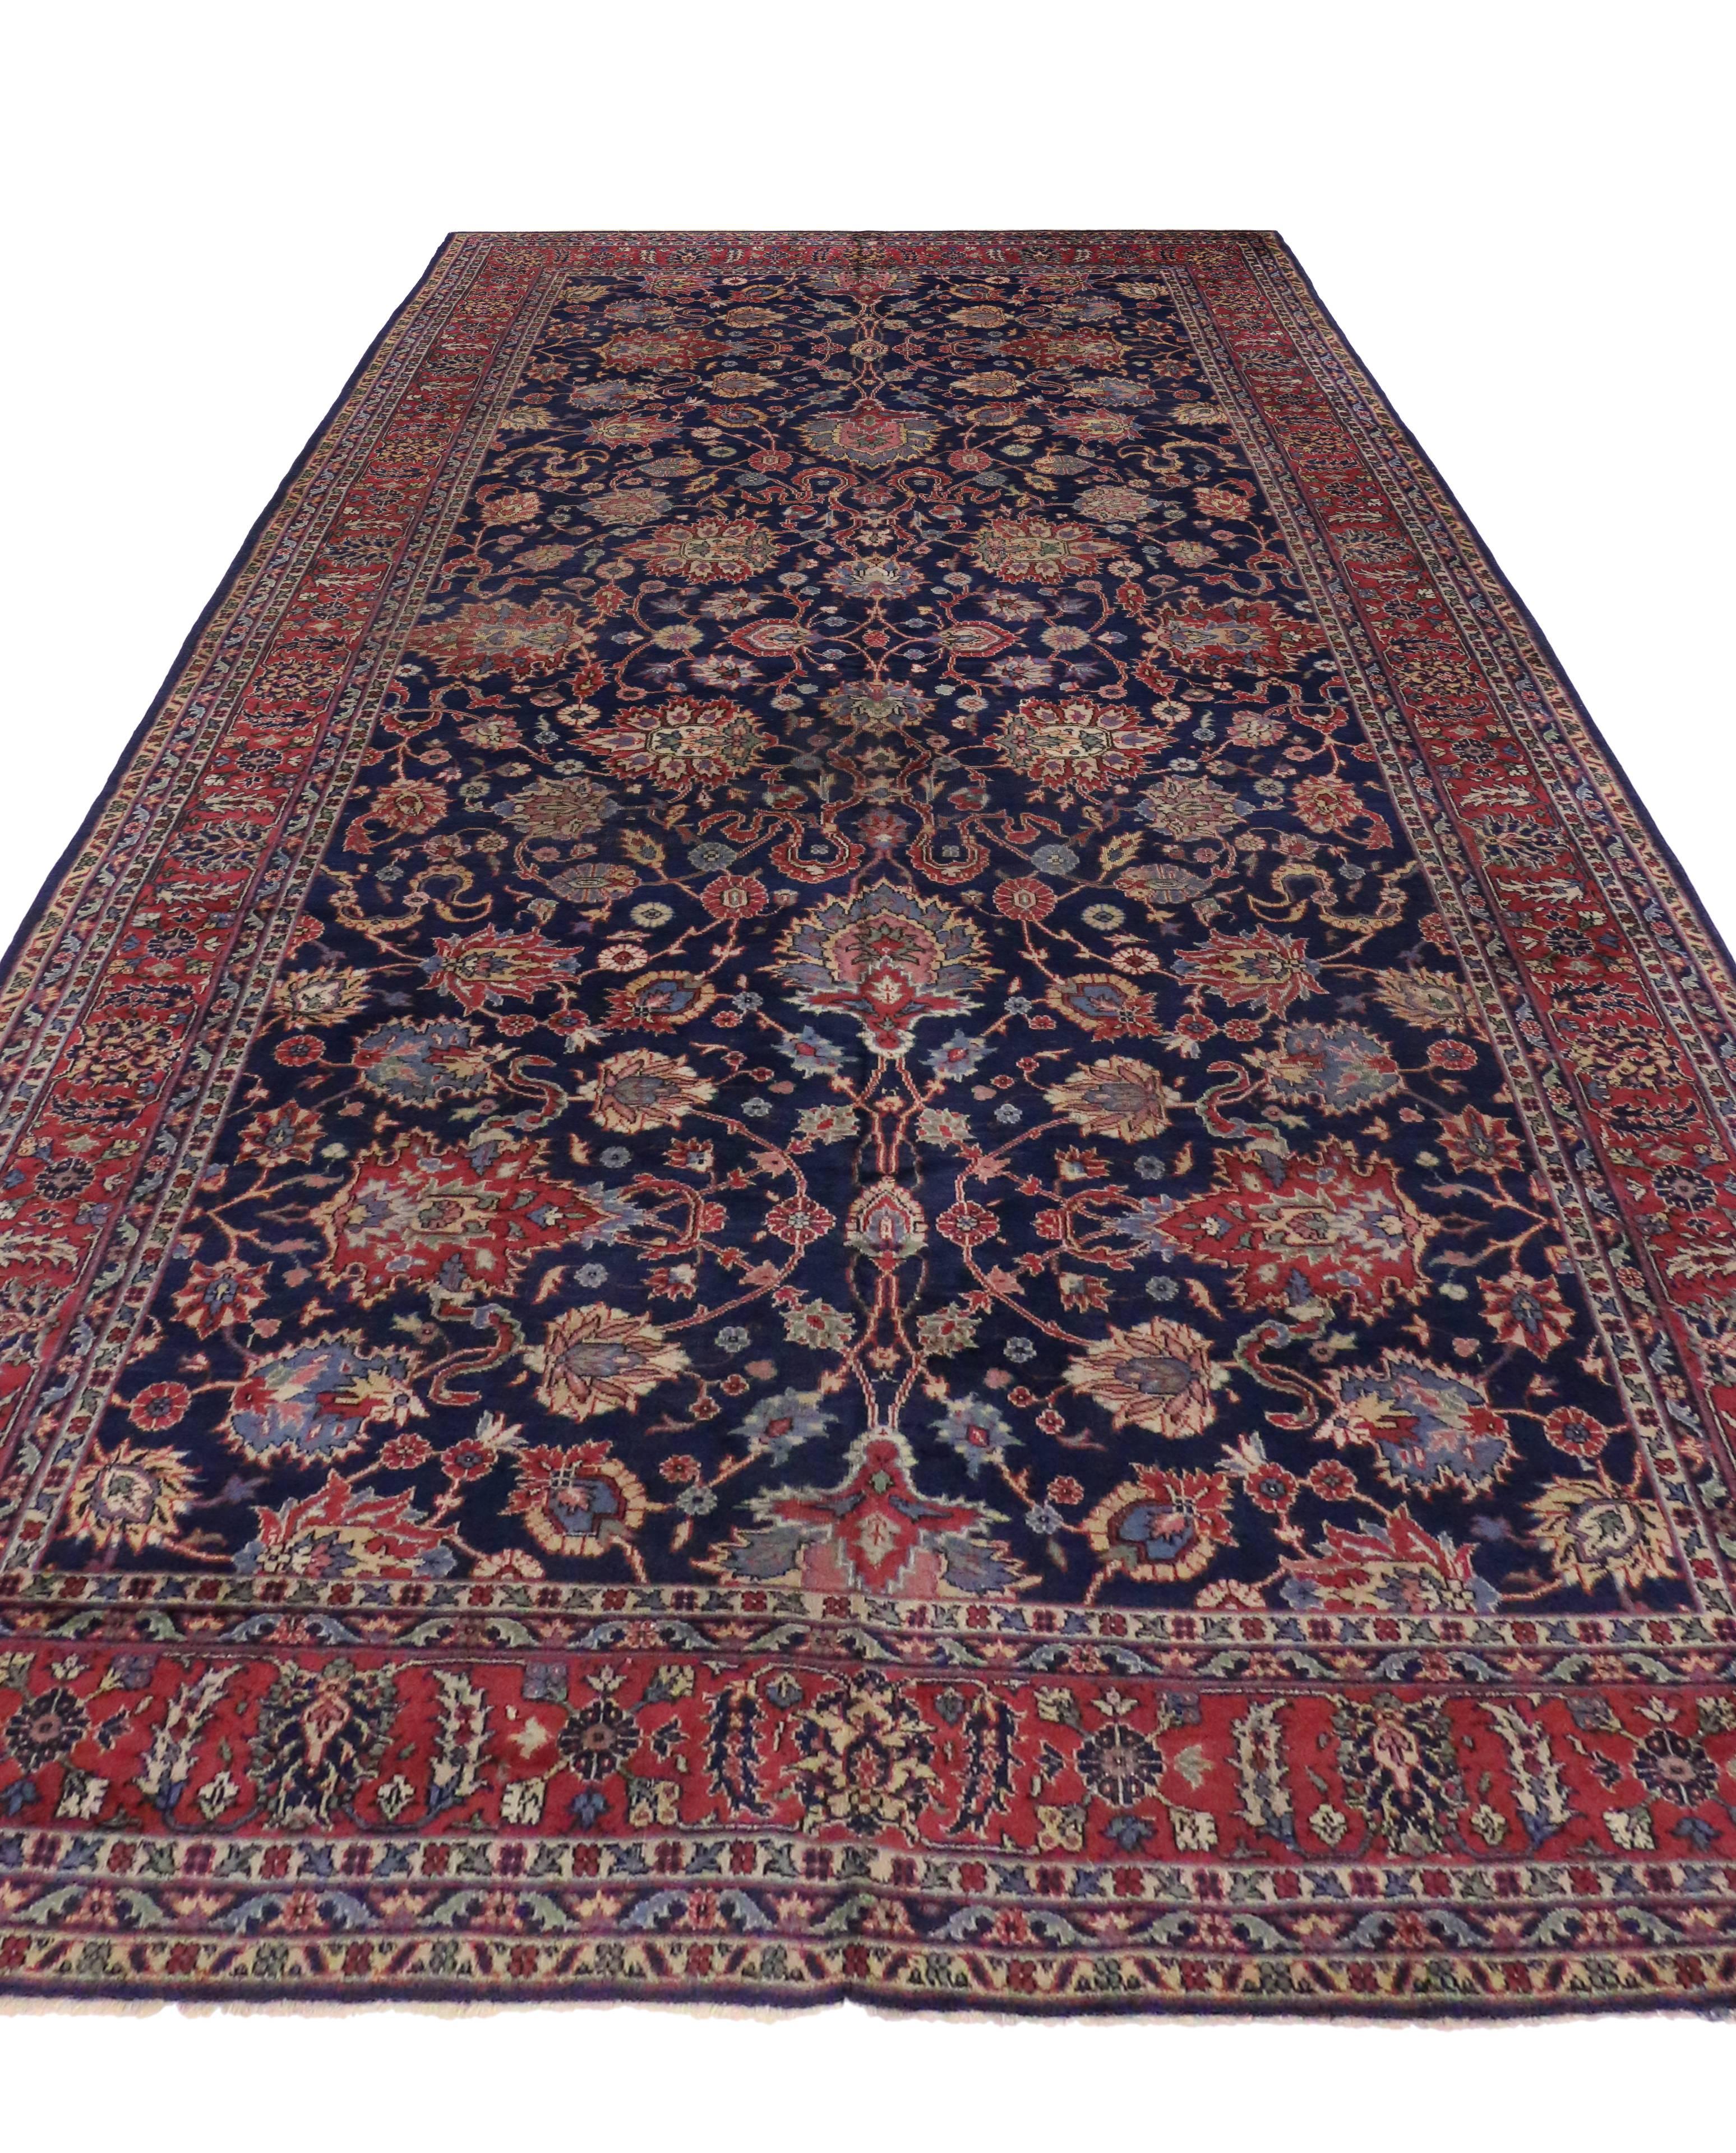 Wool Antique Turkish Blue Sparta Gallery Rug with Old World French Chateau Style 